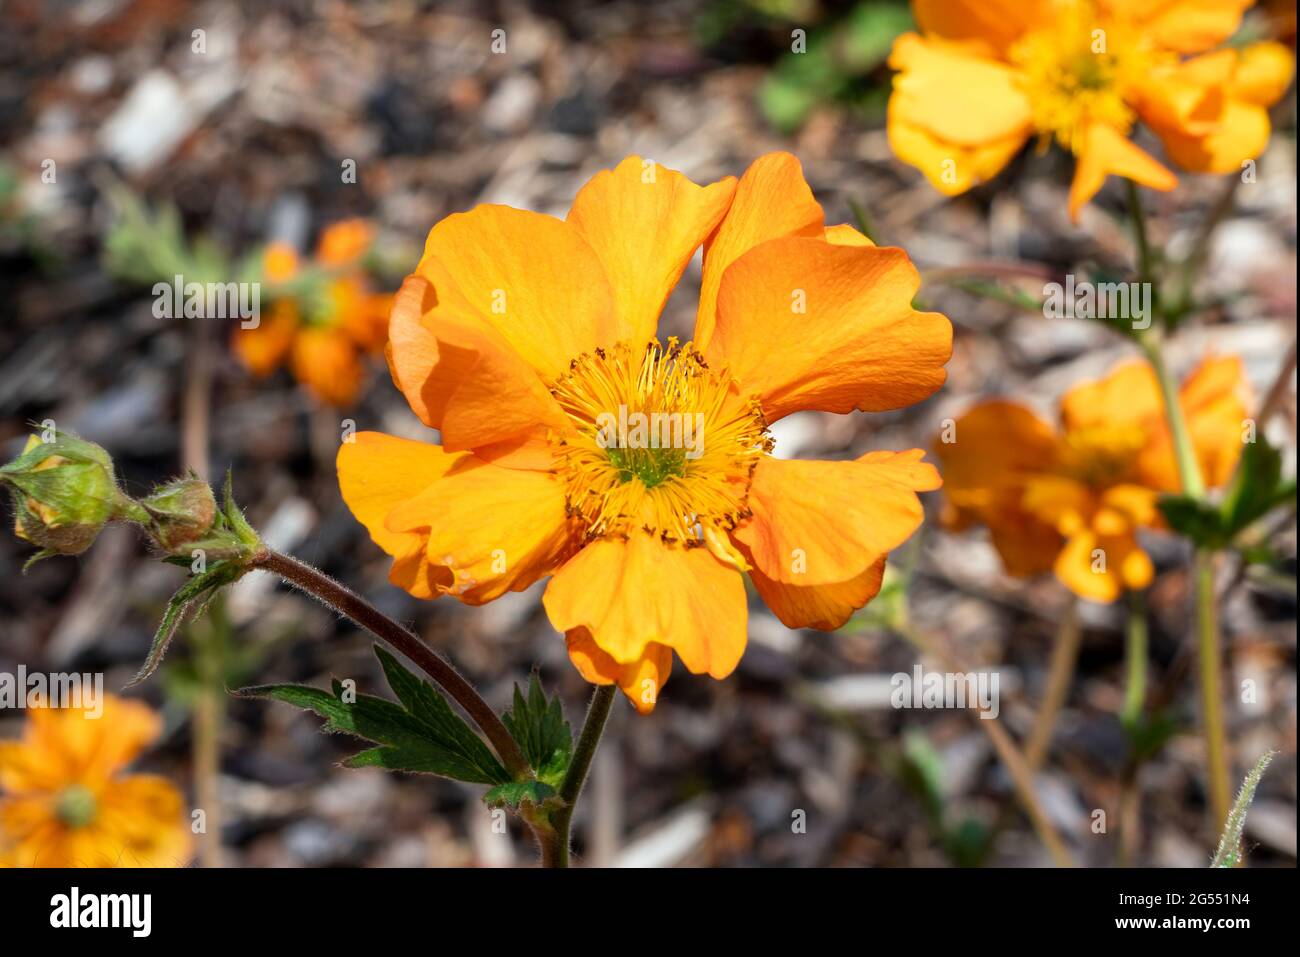 Geum 'Fireball' a summer flowering plant with a orange yellow summertime flower commonly known as Avens, stock photo image Stock Photo